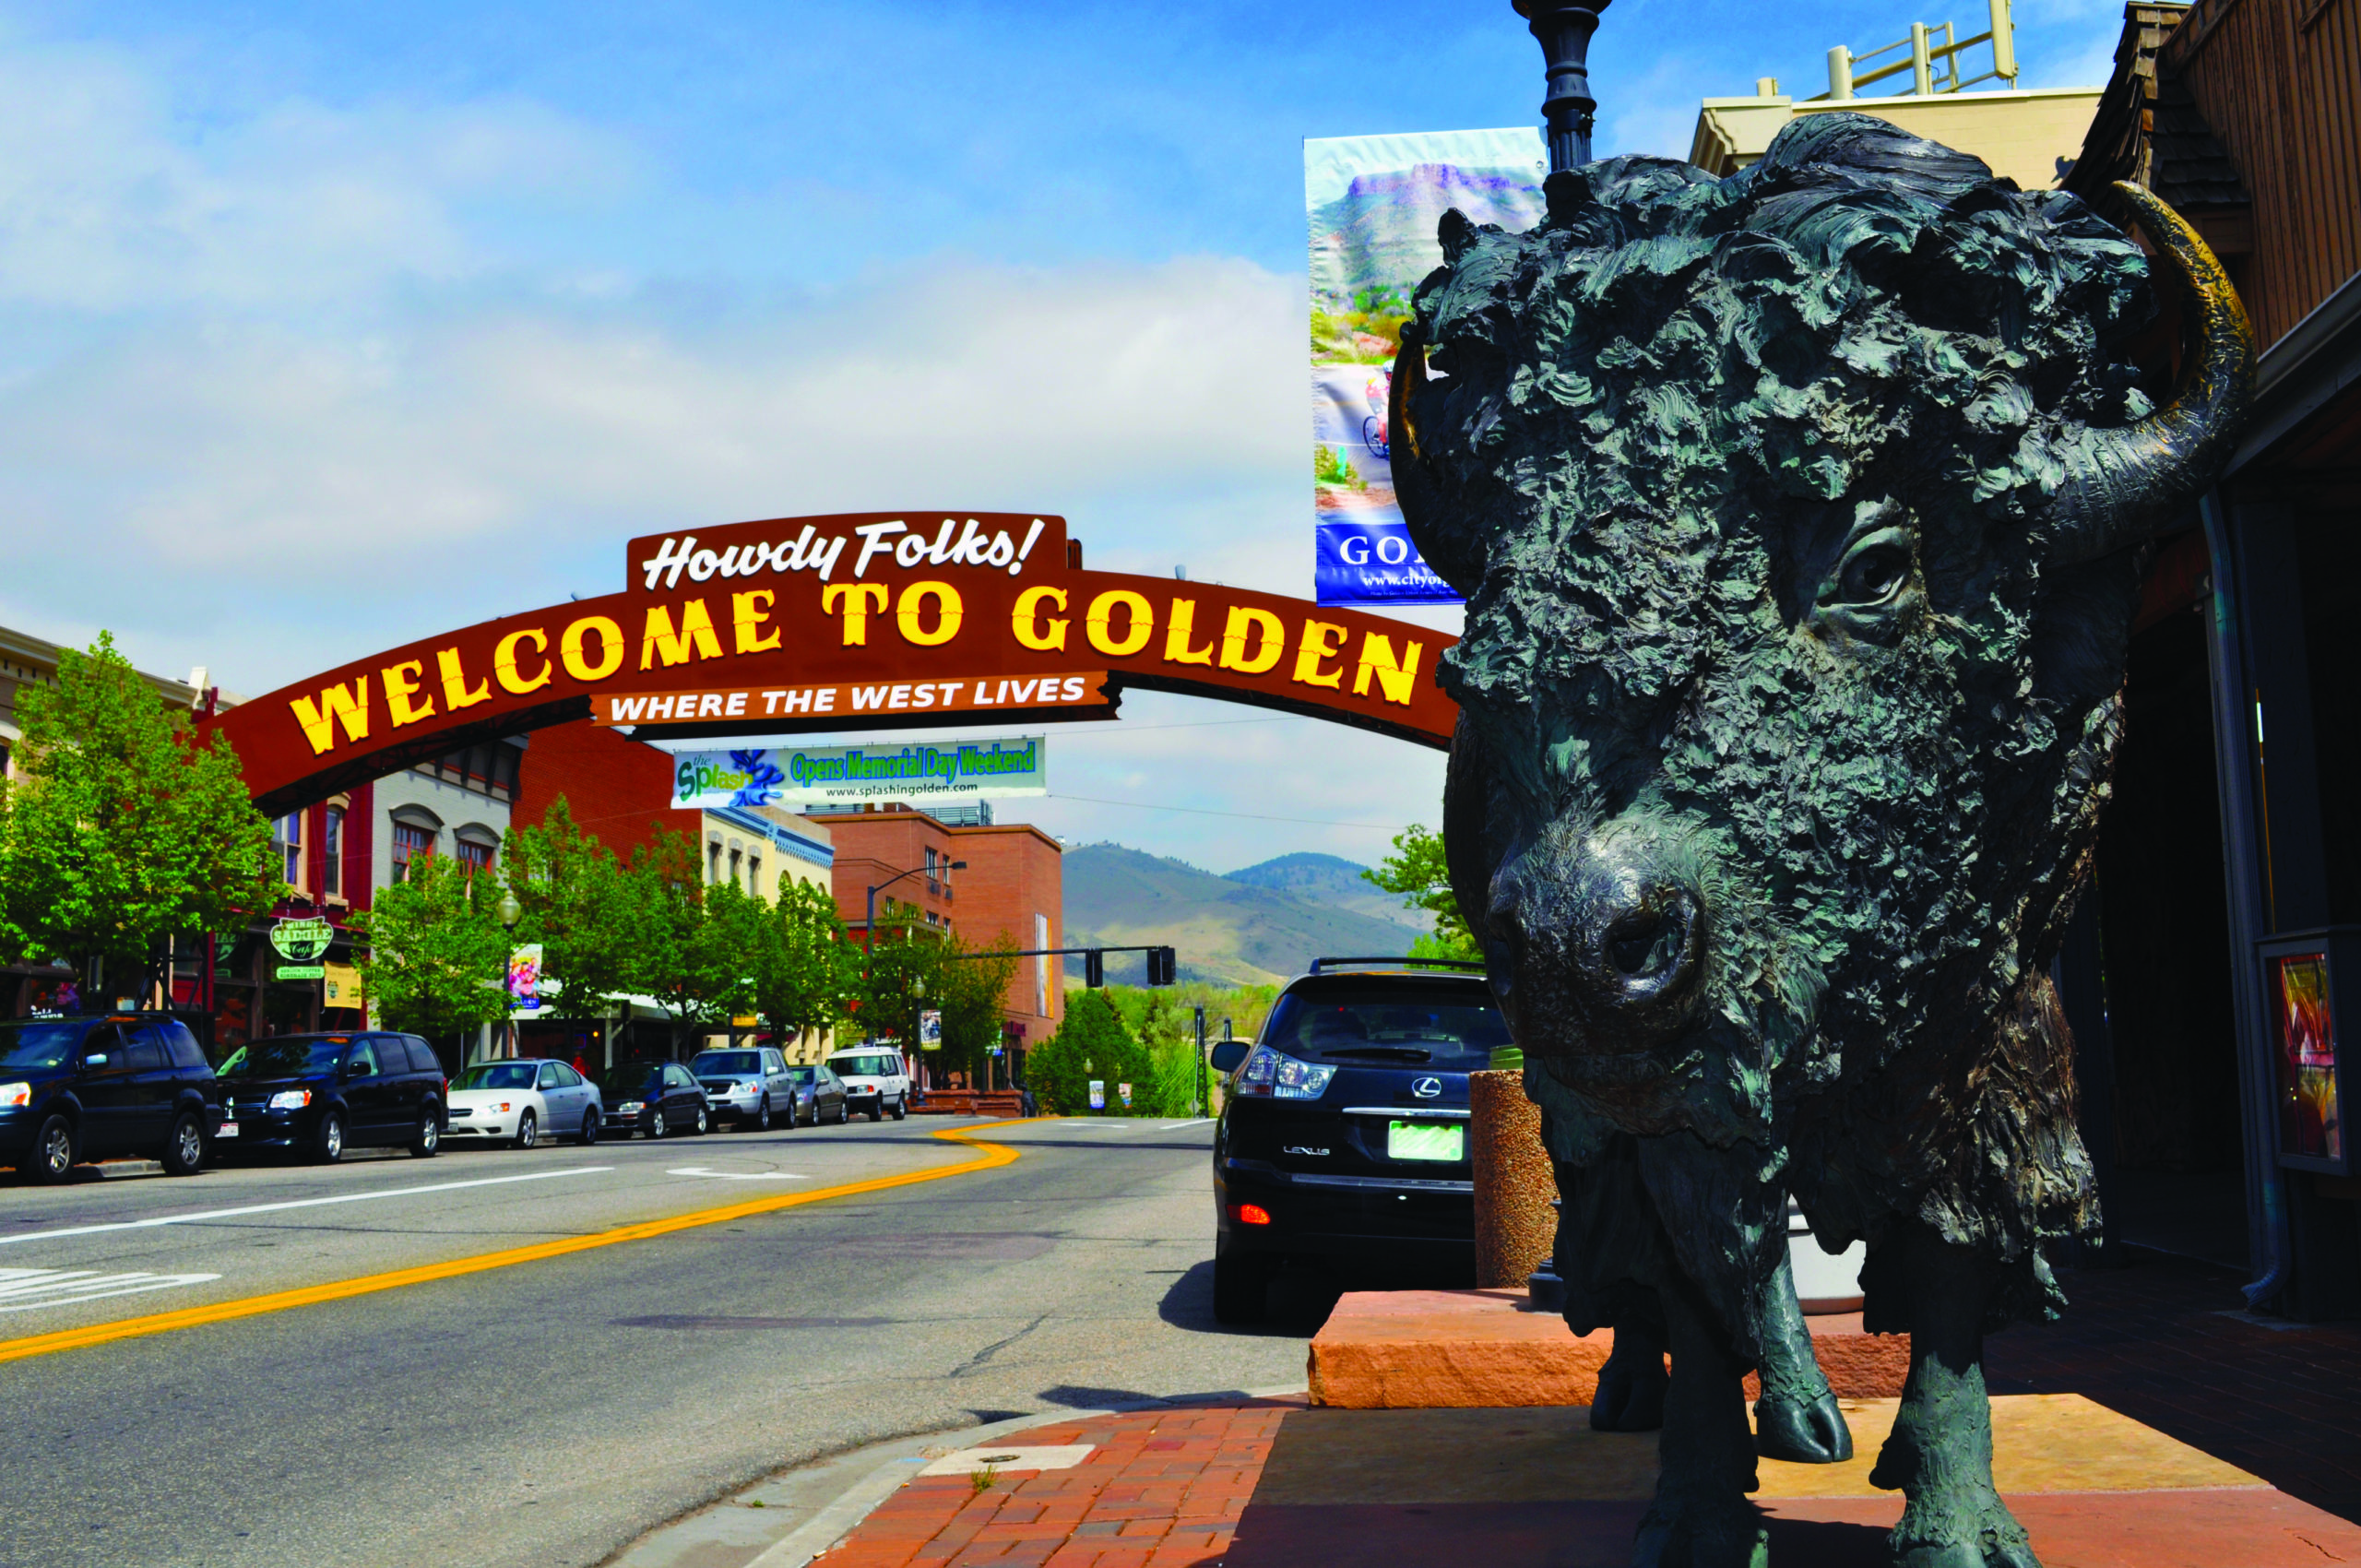 Statue of a Buffalo on a car-lined street in downtown Golden with a red arch that goes over the street that says "Howdy Folks! Welcome to Golden, Where the West Lives"